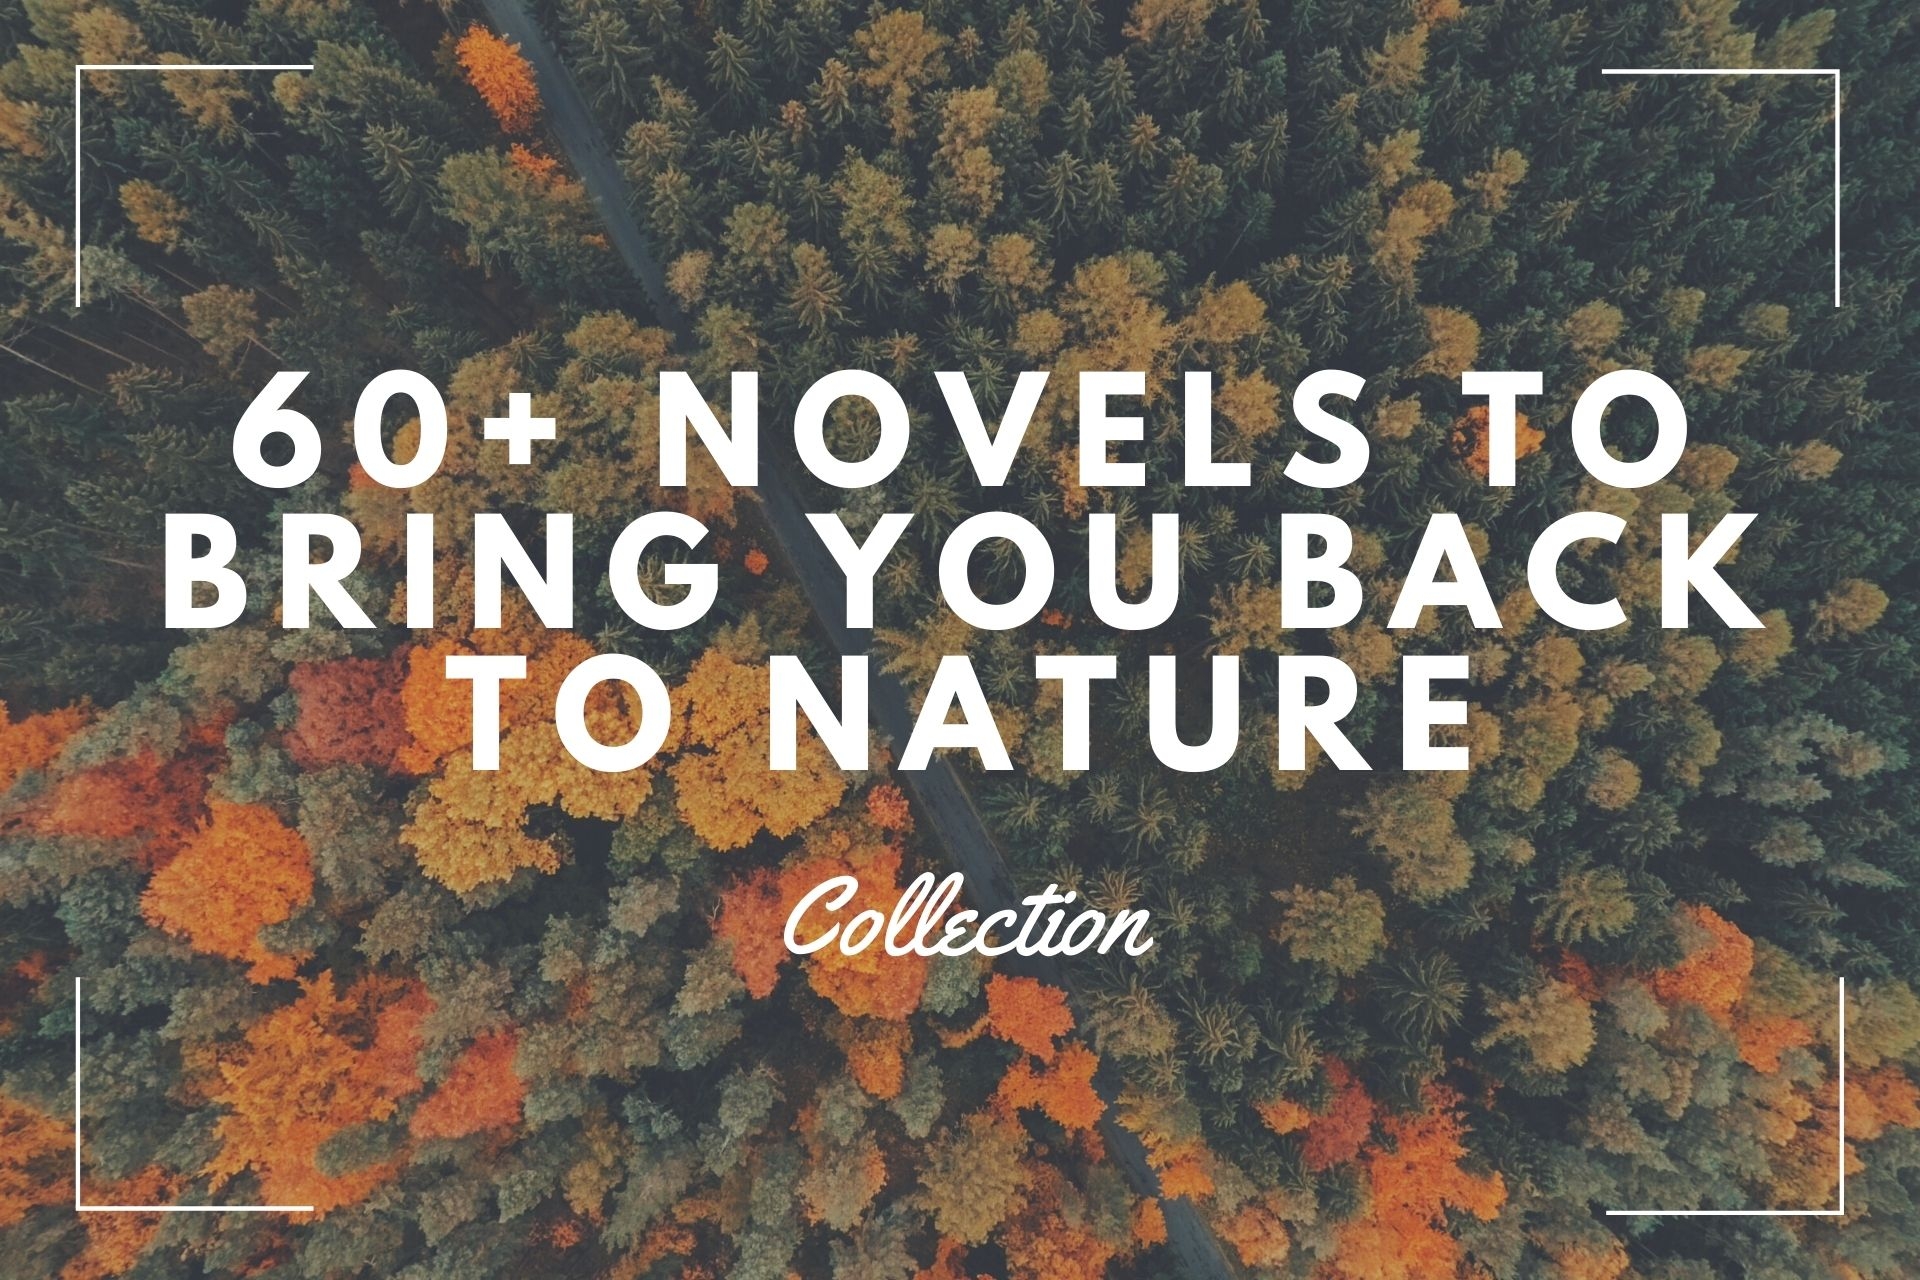 60+ Novels to Bring You Back to Nature